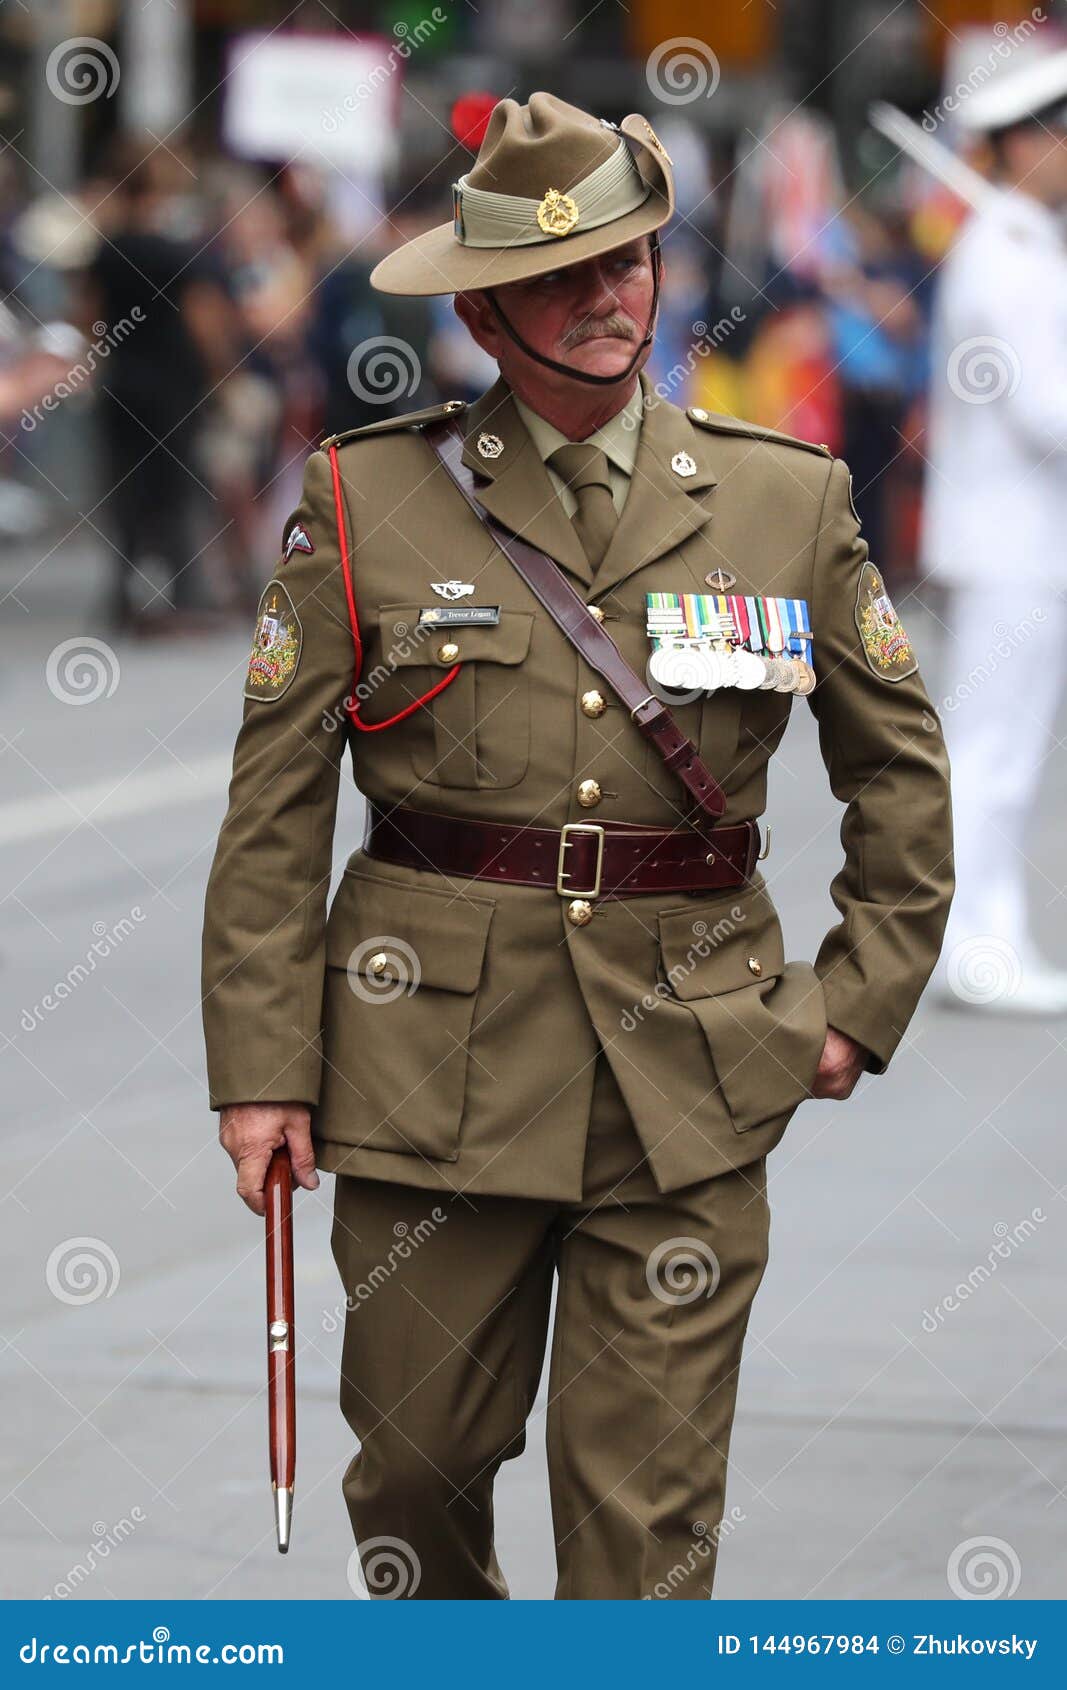 145 Army Australia Officer Photos Free & Royalty-Free Photos from Dreamstime